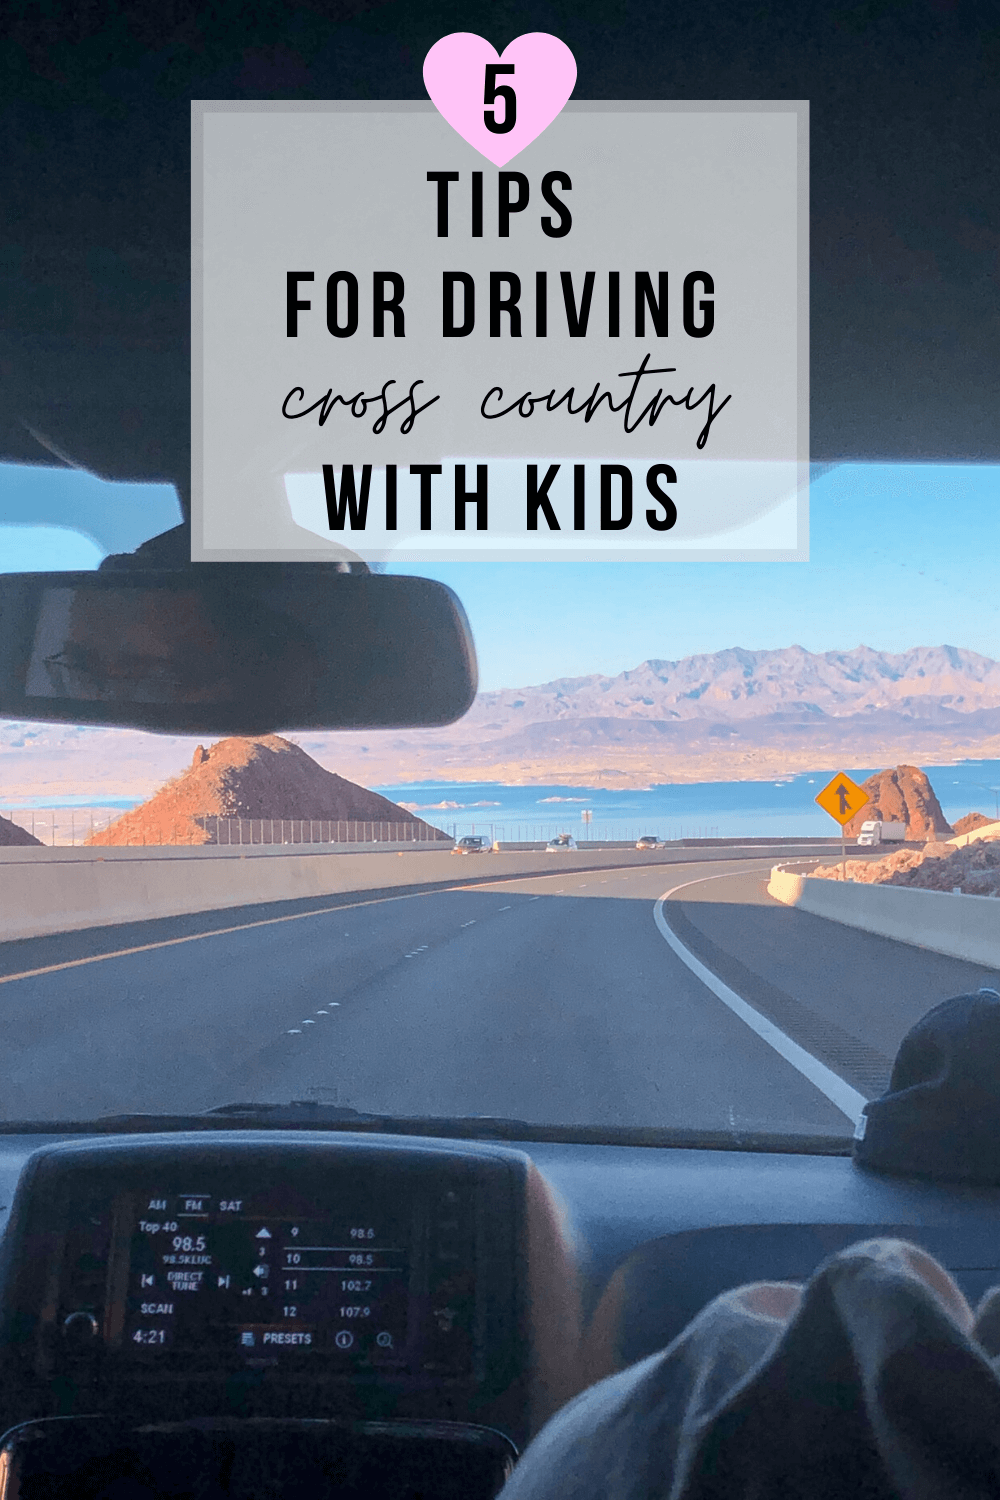 5 Tips for Driving Cross Country with Kids | www.thevegasmom.com